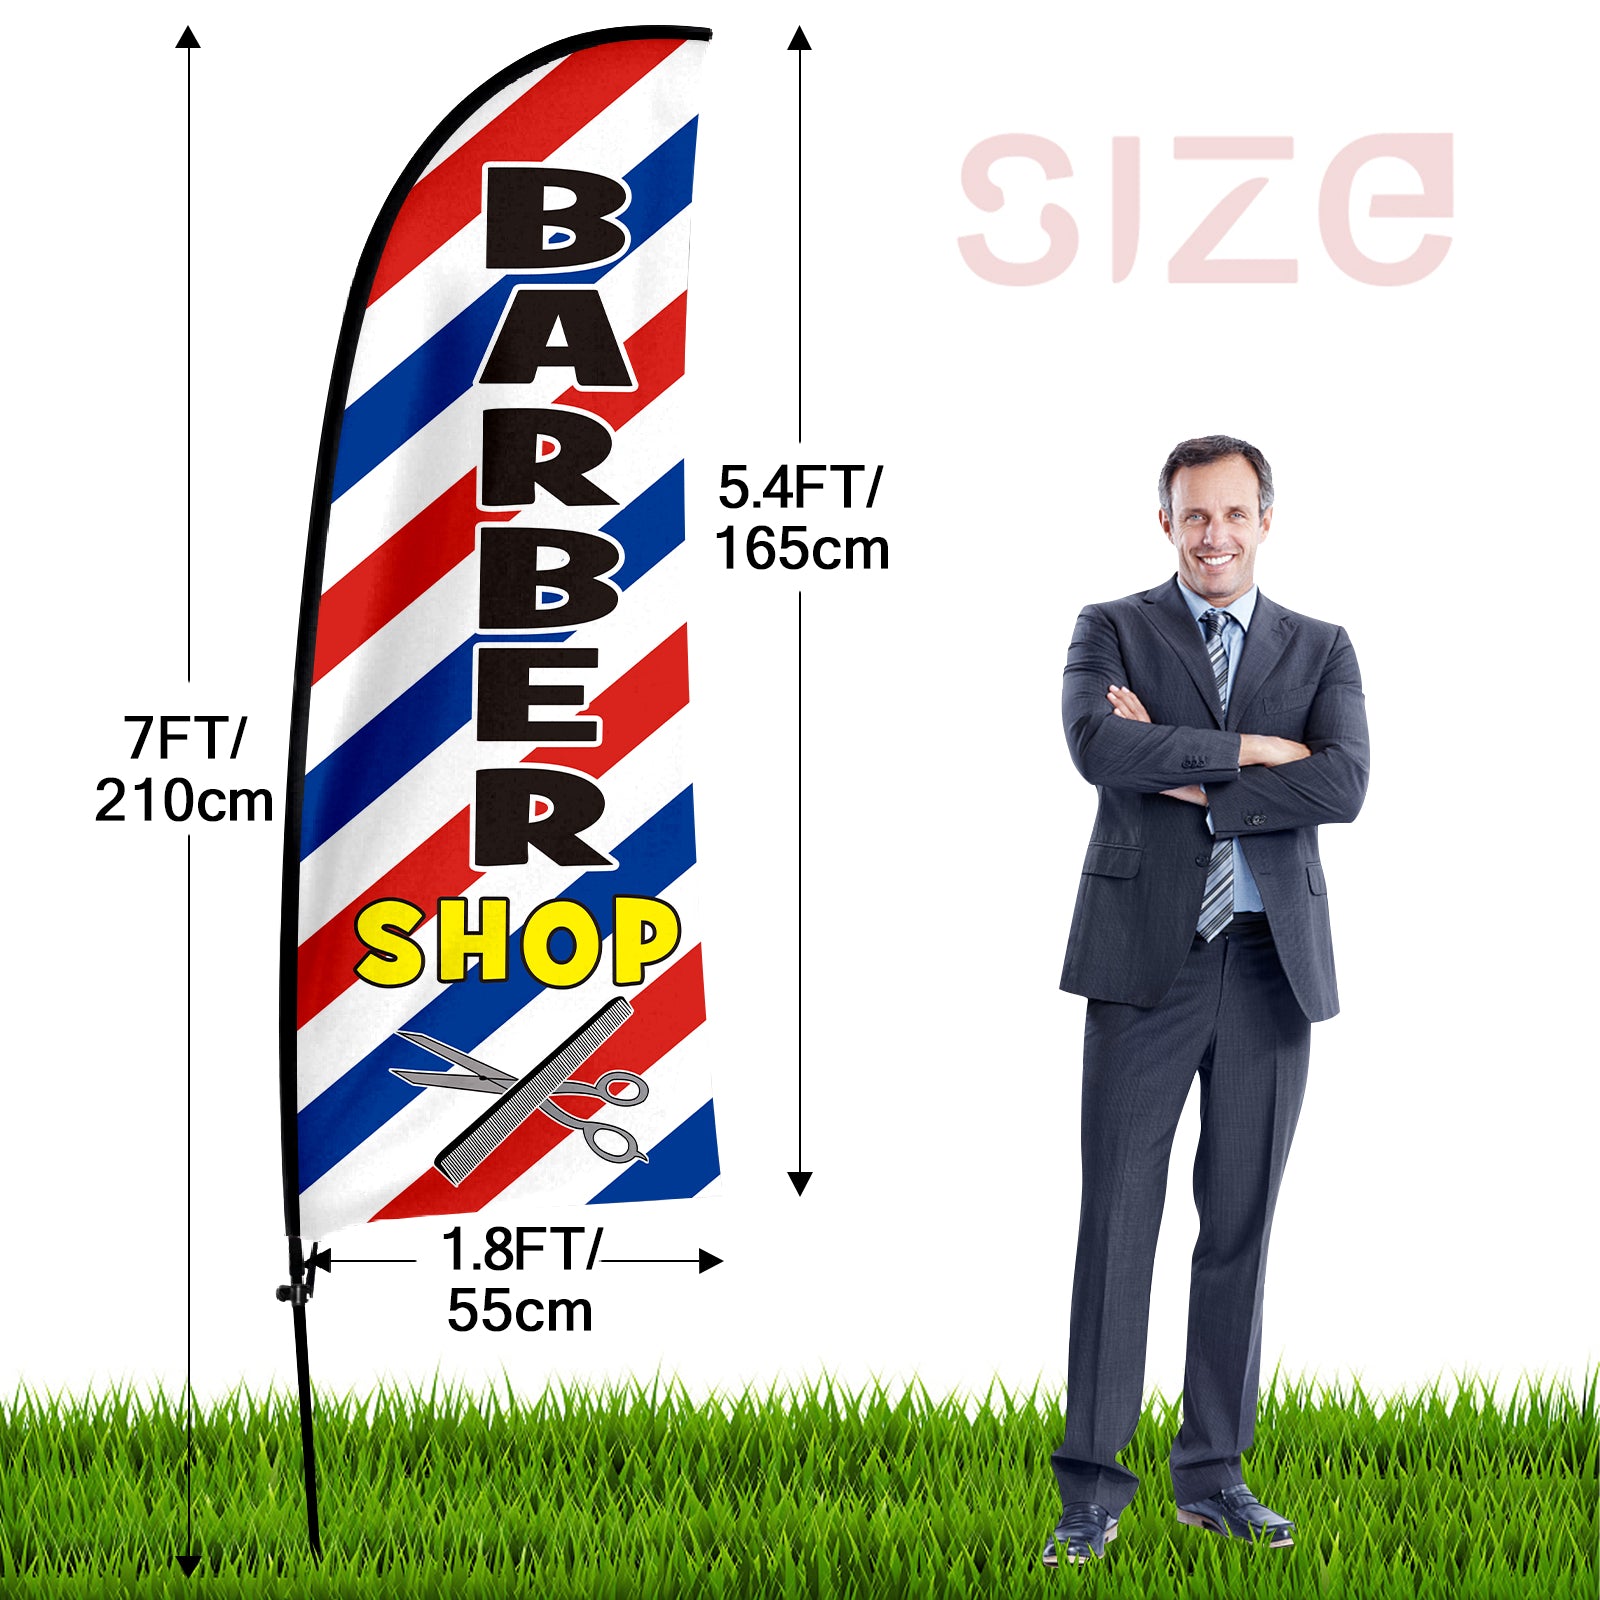 QSUM Barbershop Themed Swooper Flag, 7FT Barbershop Banner Feather Flag with Carbon Fiber Pole Kit/Ground Stake, Barbershop Signs for Business Advertising